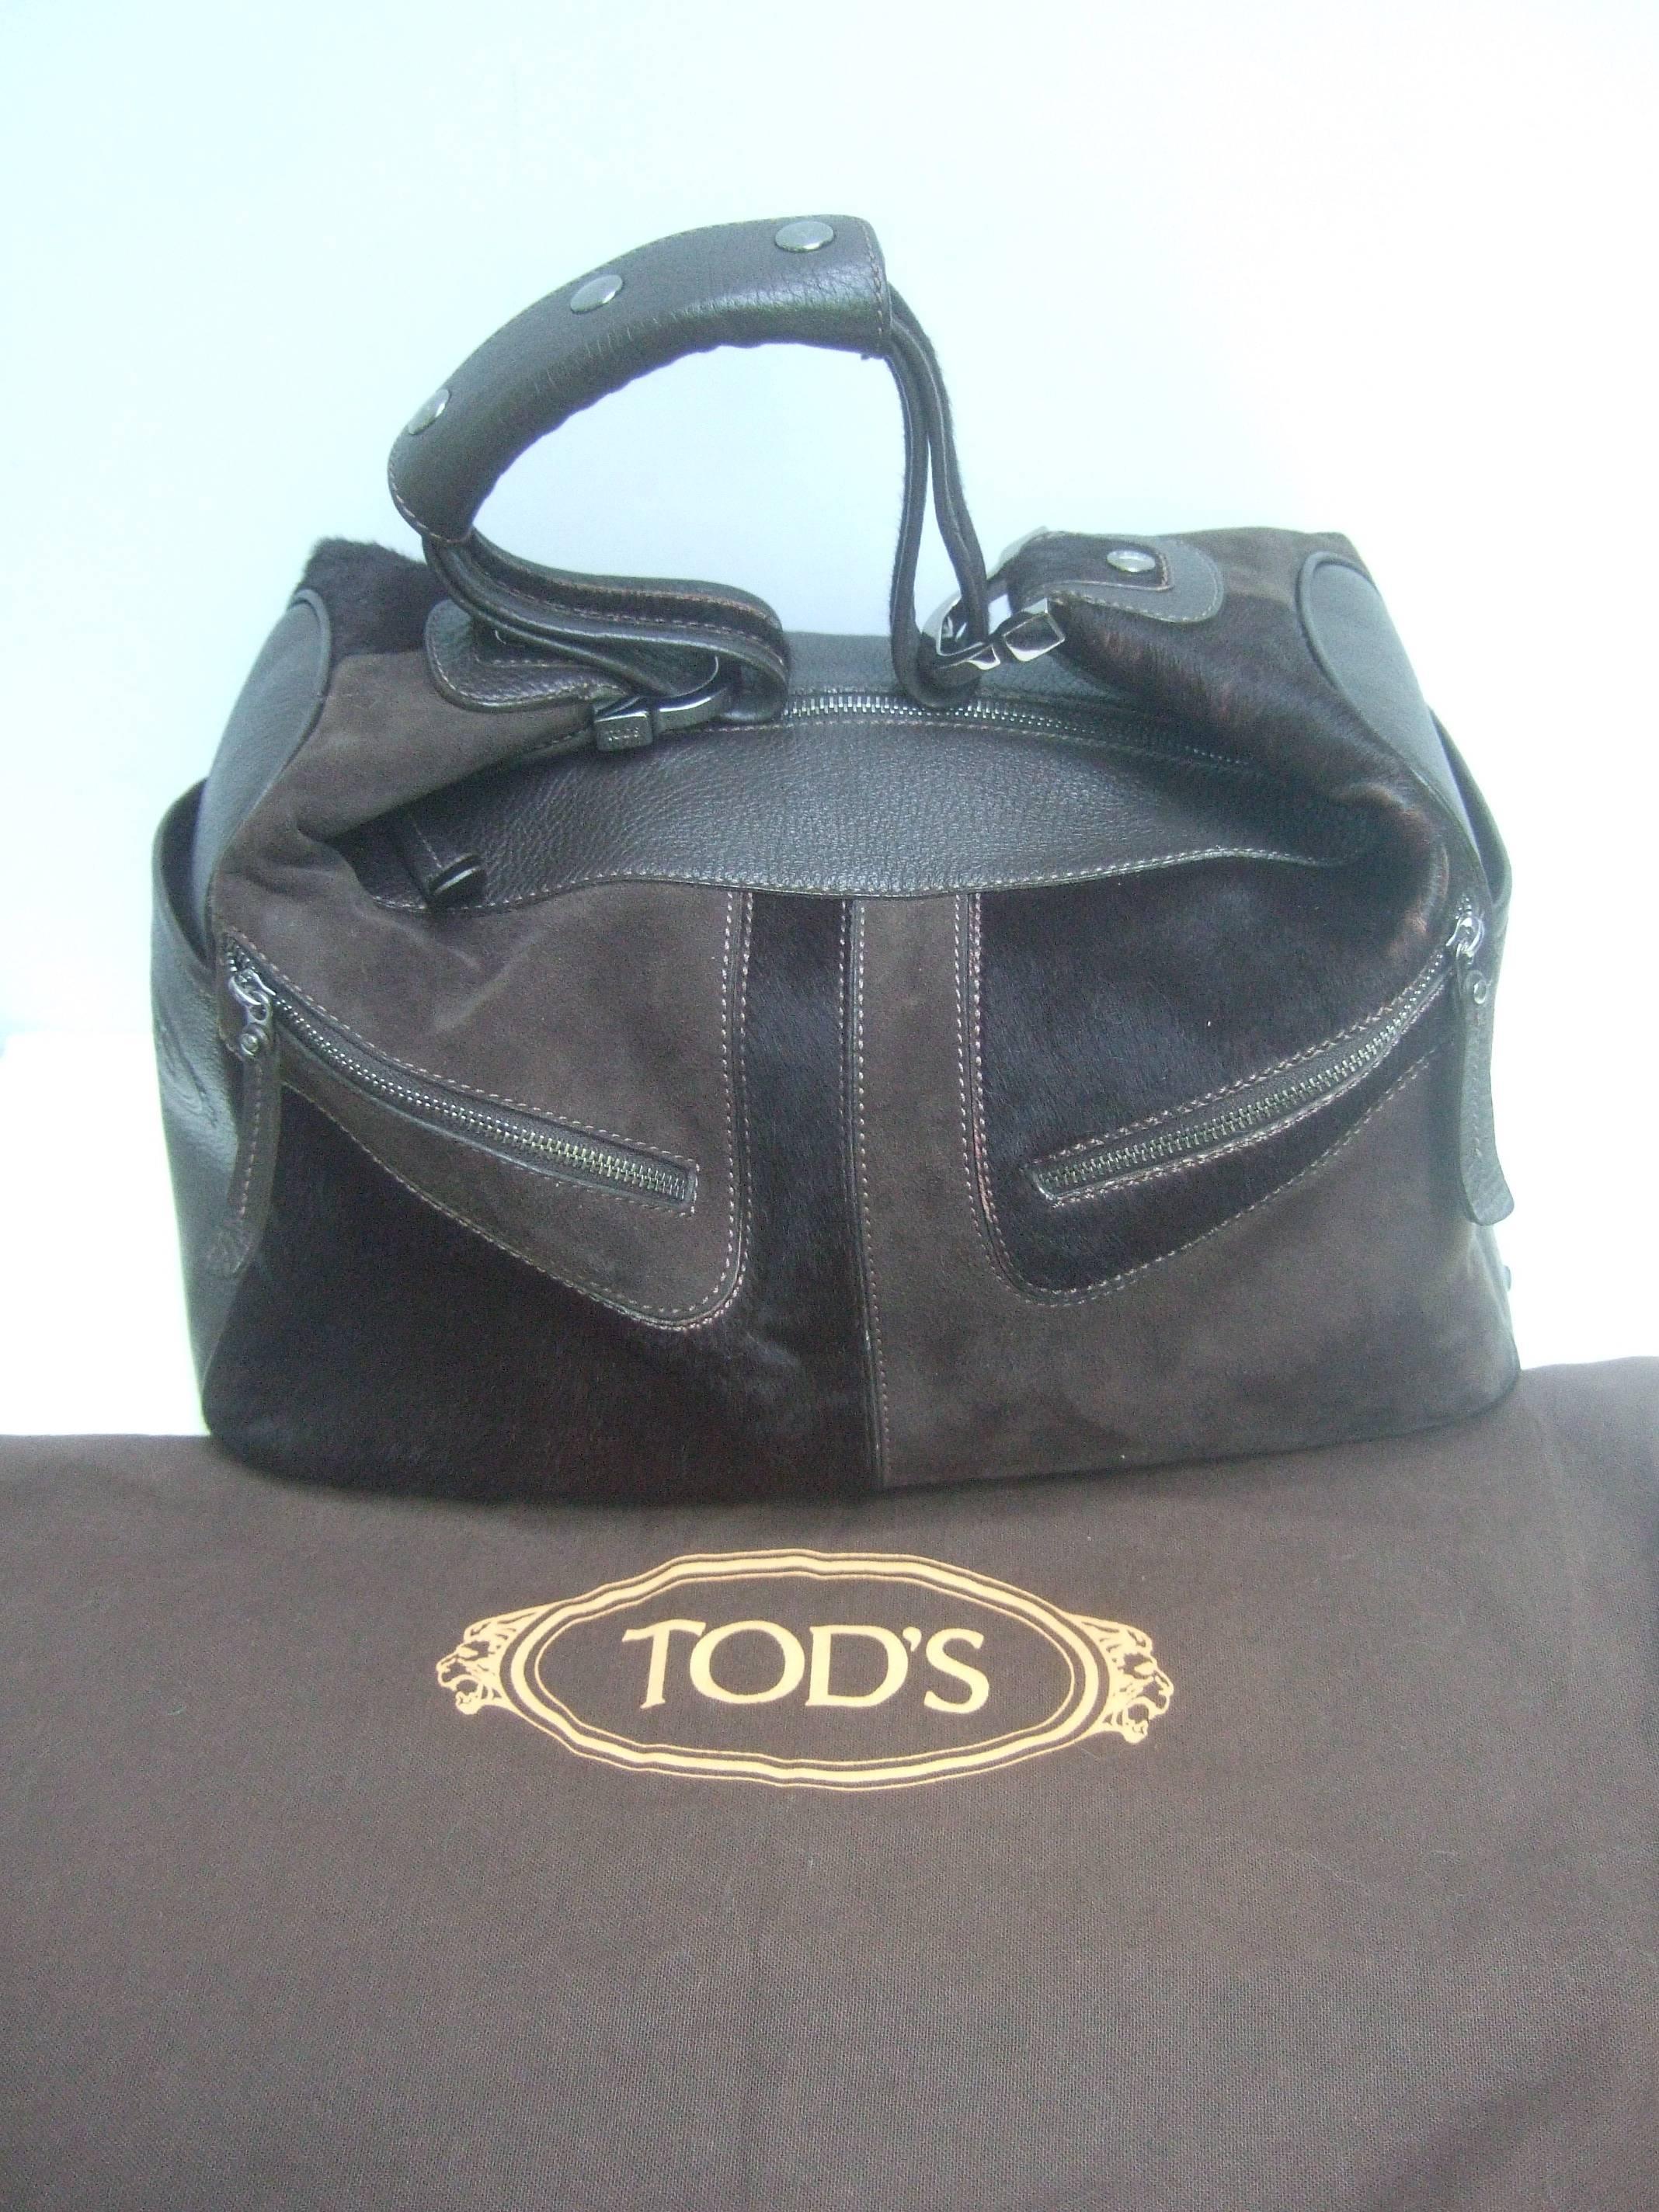 Tod's Chocolate brown leather pony hair handbag
The stylish designer handbag is partially covered
with supple brown leather with a pebble leather 
finish accented with brown suede panels 

The exterior panels are covered with dark brown 
pony